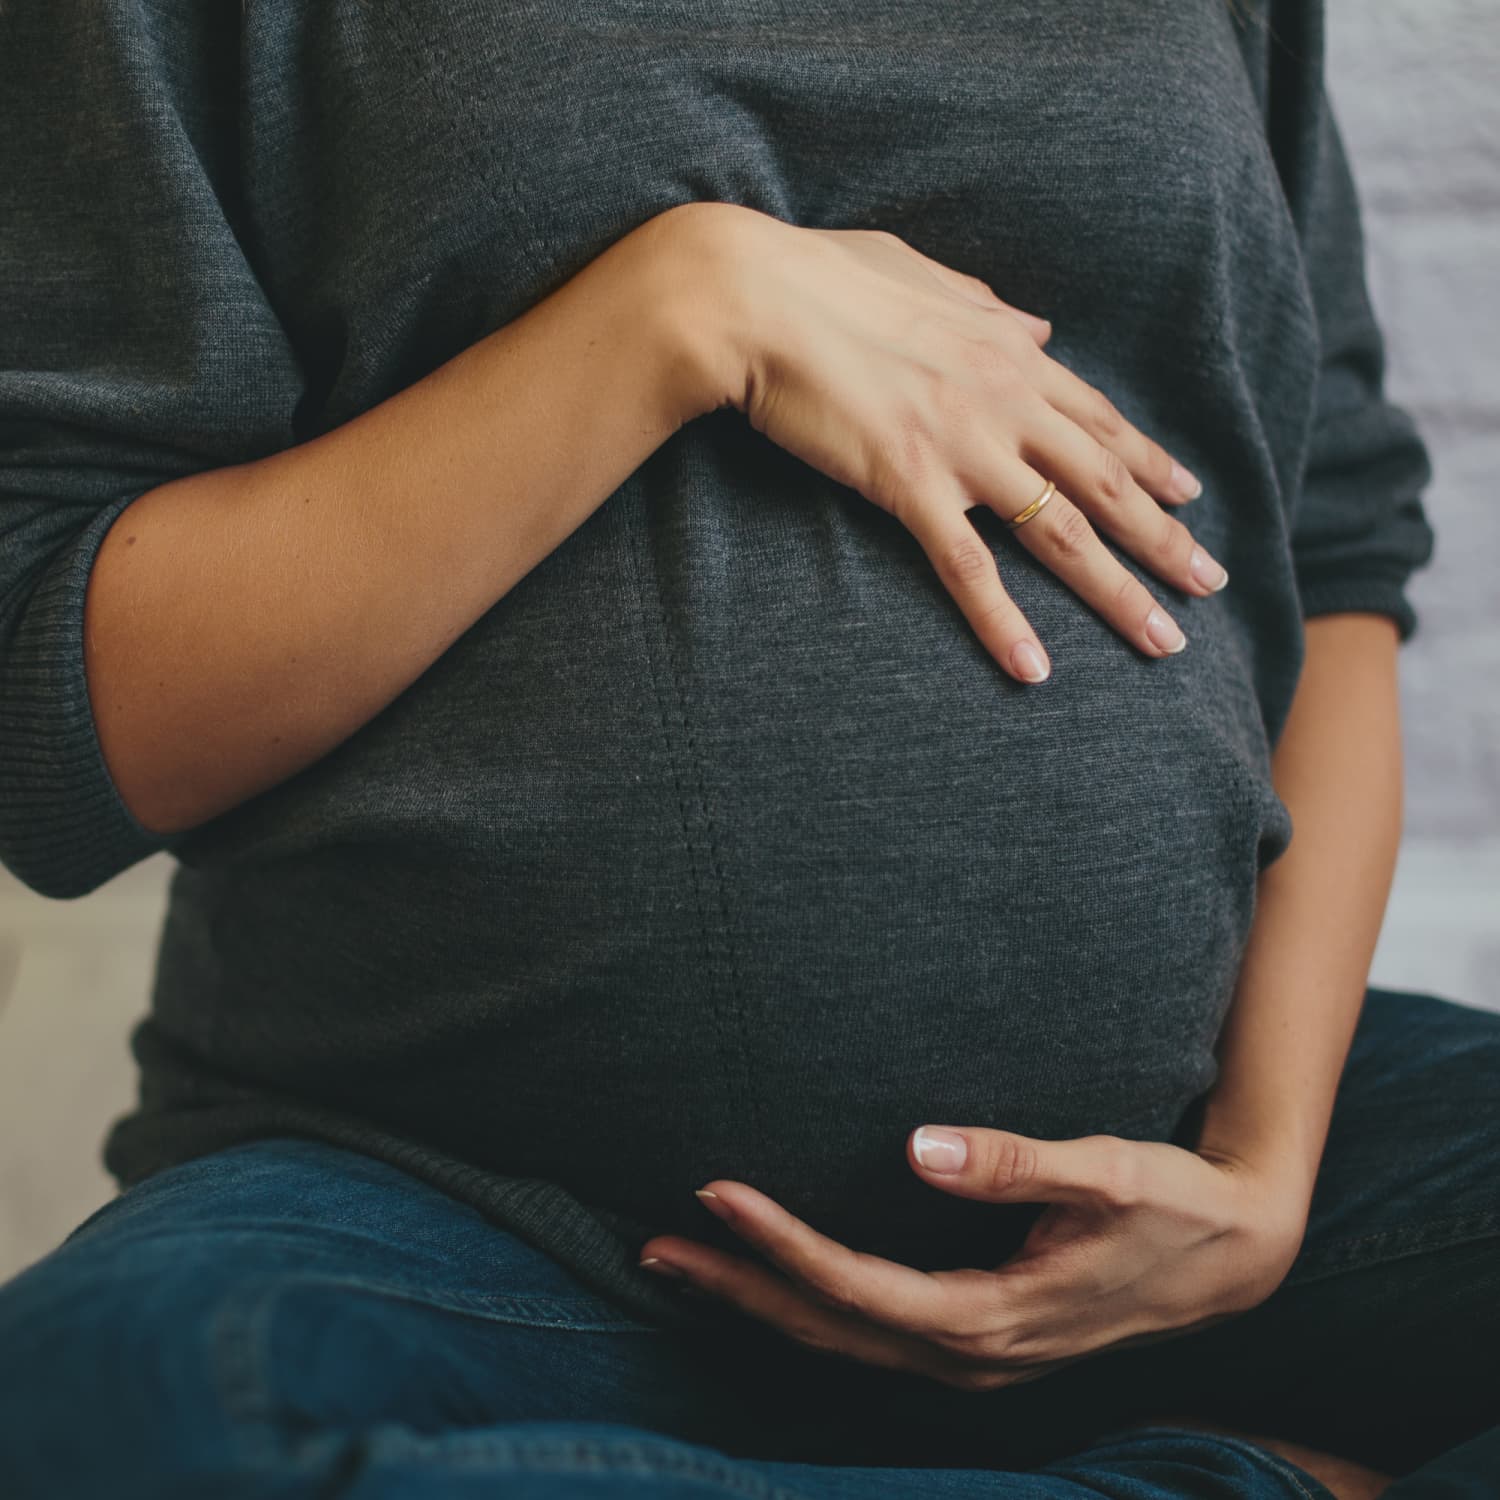 Pregnancy over the age of 40 - the options and associated risks